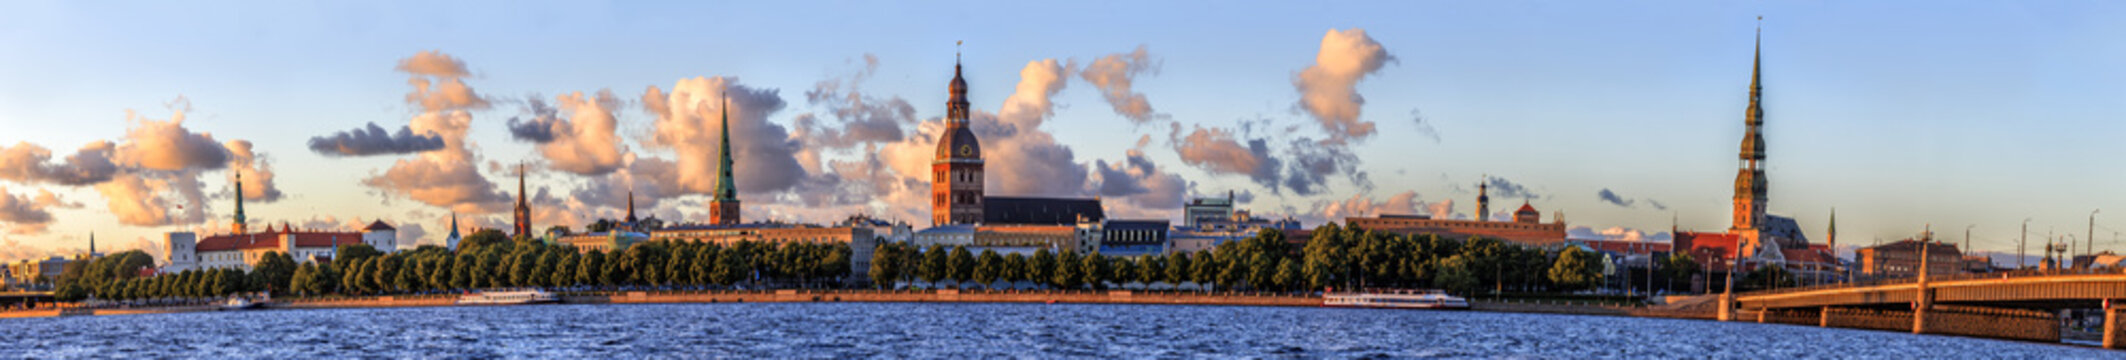 Riga Old Town Skyline panorama during sunset time. Panoramic montage from 30 images